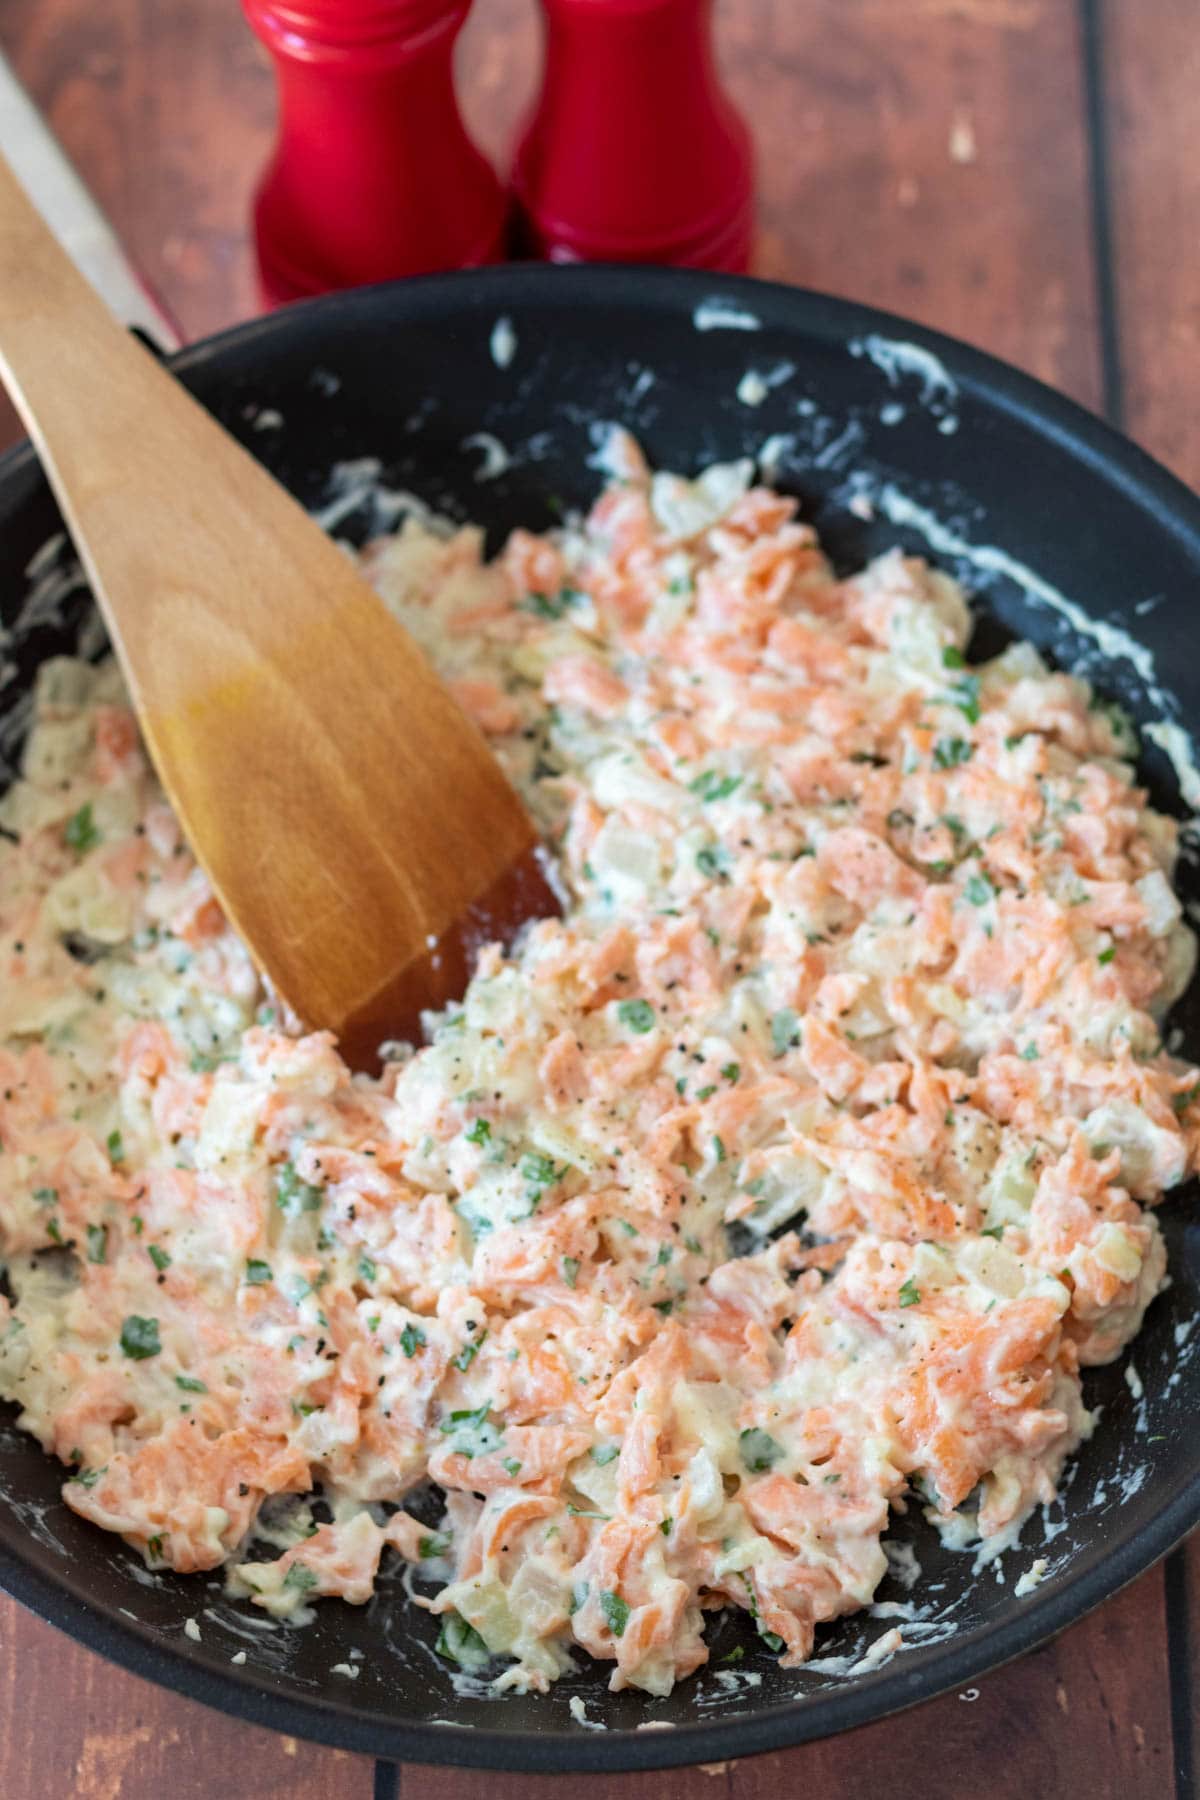 Stirring parsley into the healthy creamy salmon pasta and seasoning to taste.